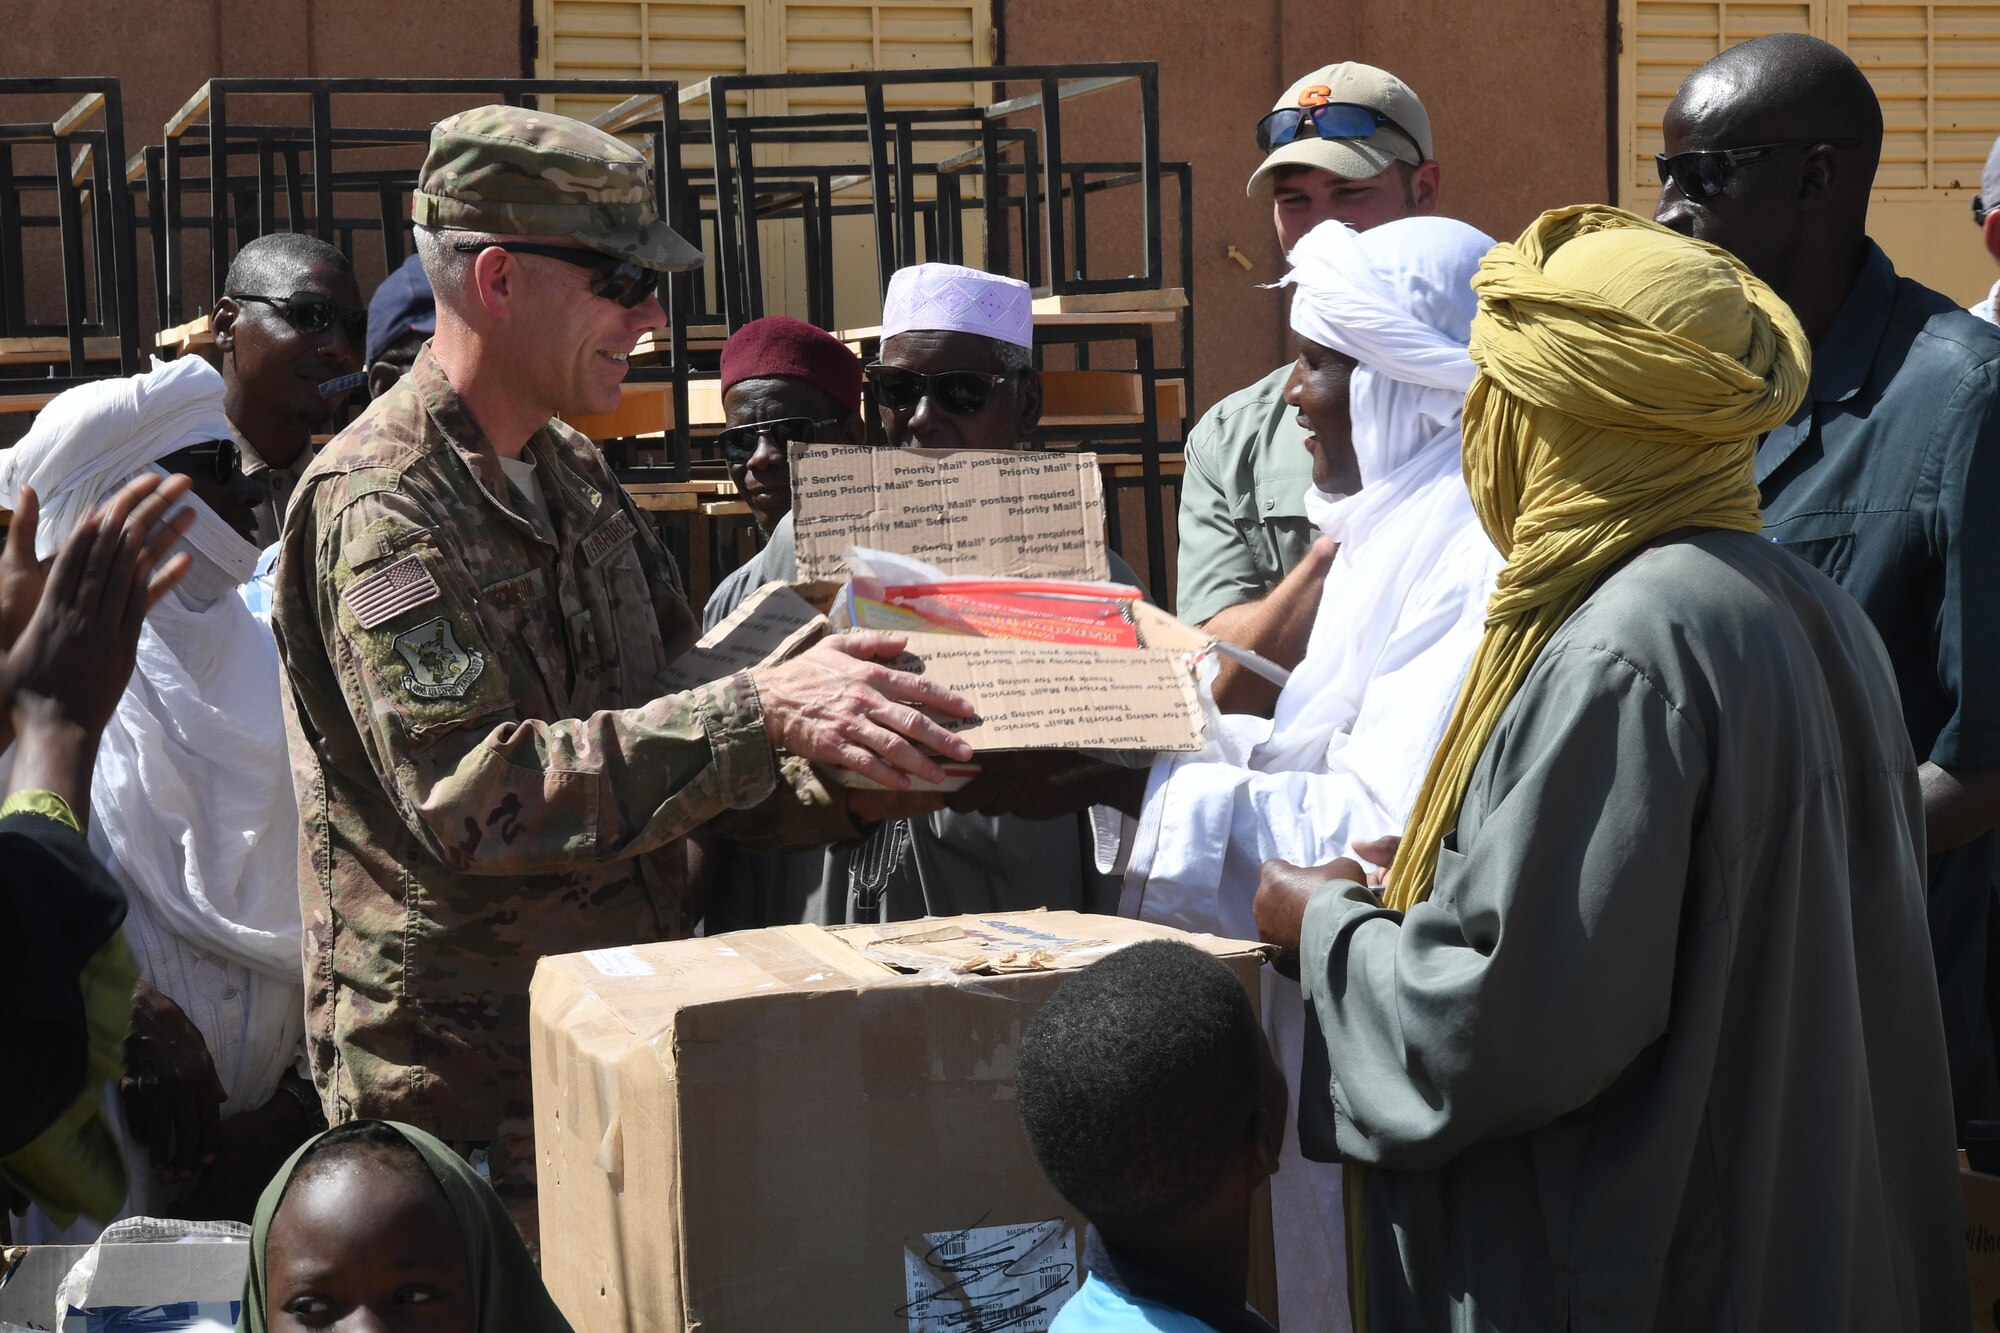 Approximately 300 desks were delivered to Misrata Primary School in Agadez, Niger, as part of a donation coordinated by U.S. Army Civil Affairs Team 203 at Nigerien Air Base 201 Oct. 23.